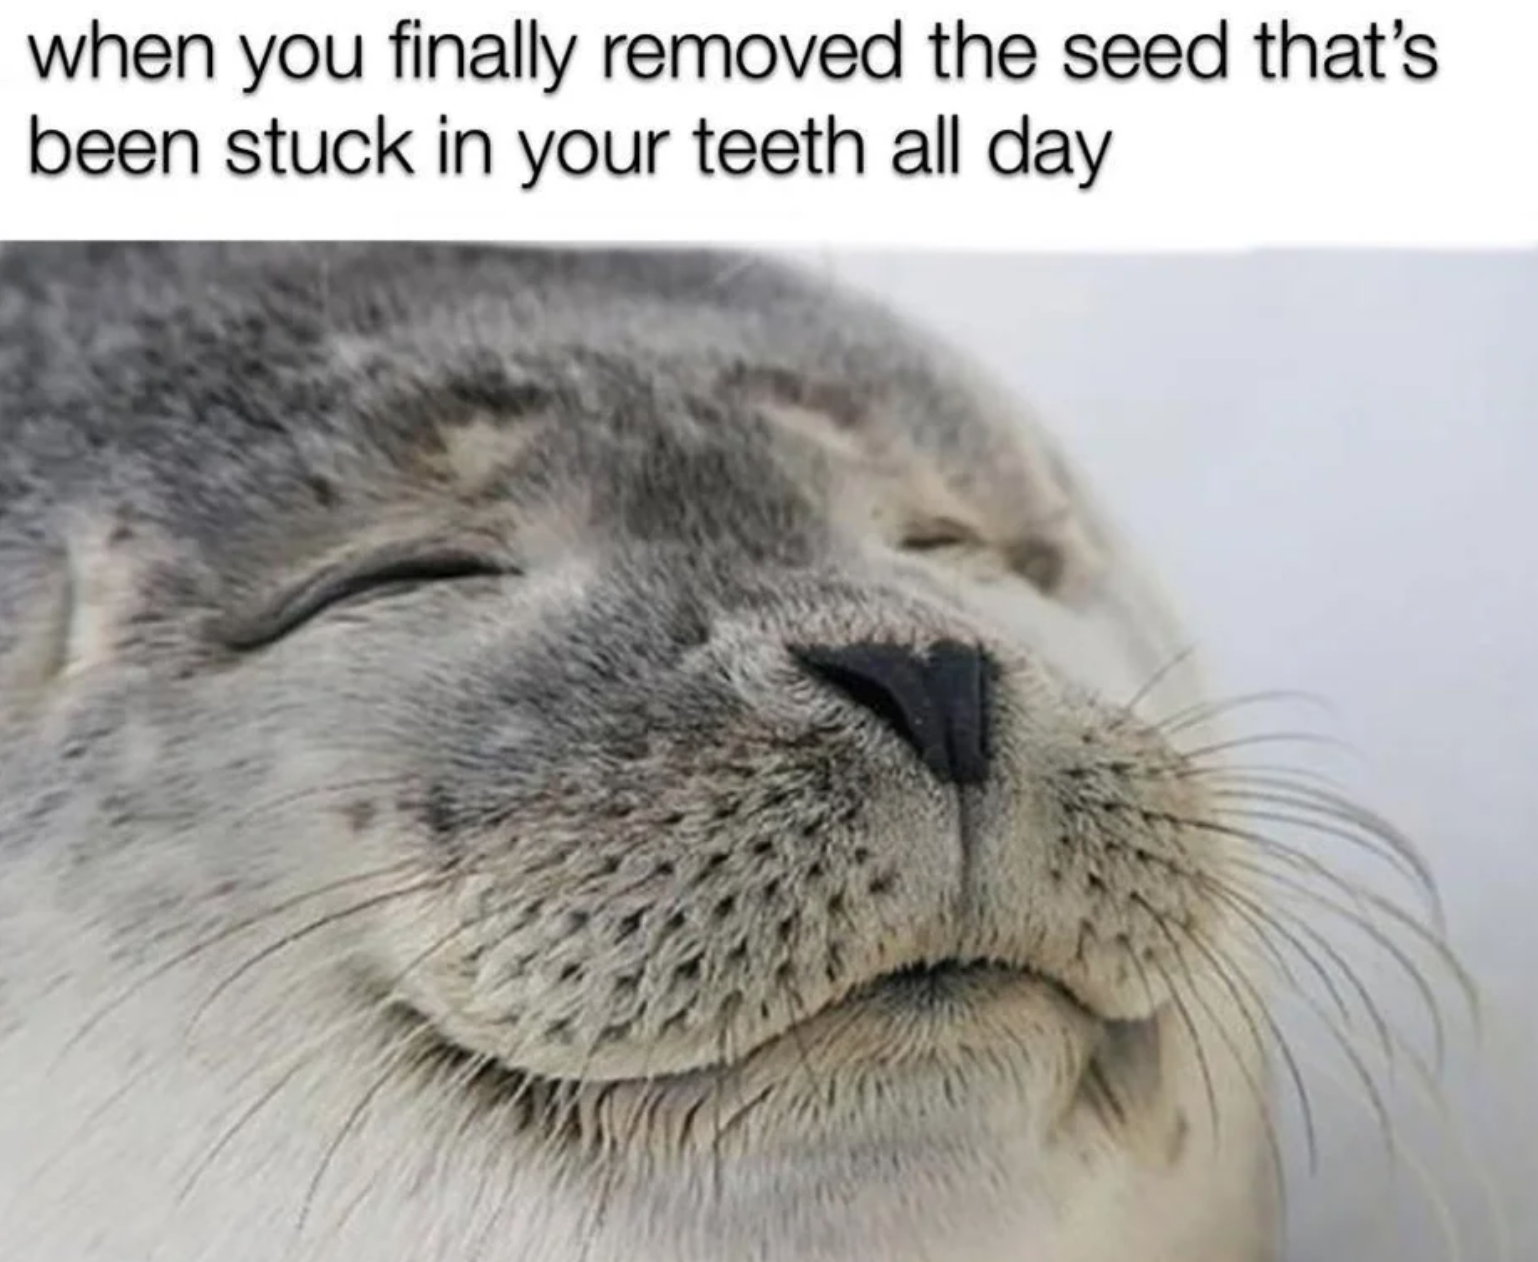 satisfied meme - when you finally removed the seed that's been stuck in your teeth all day